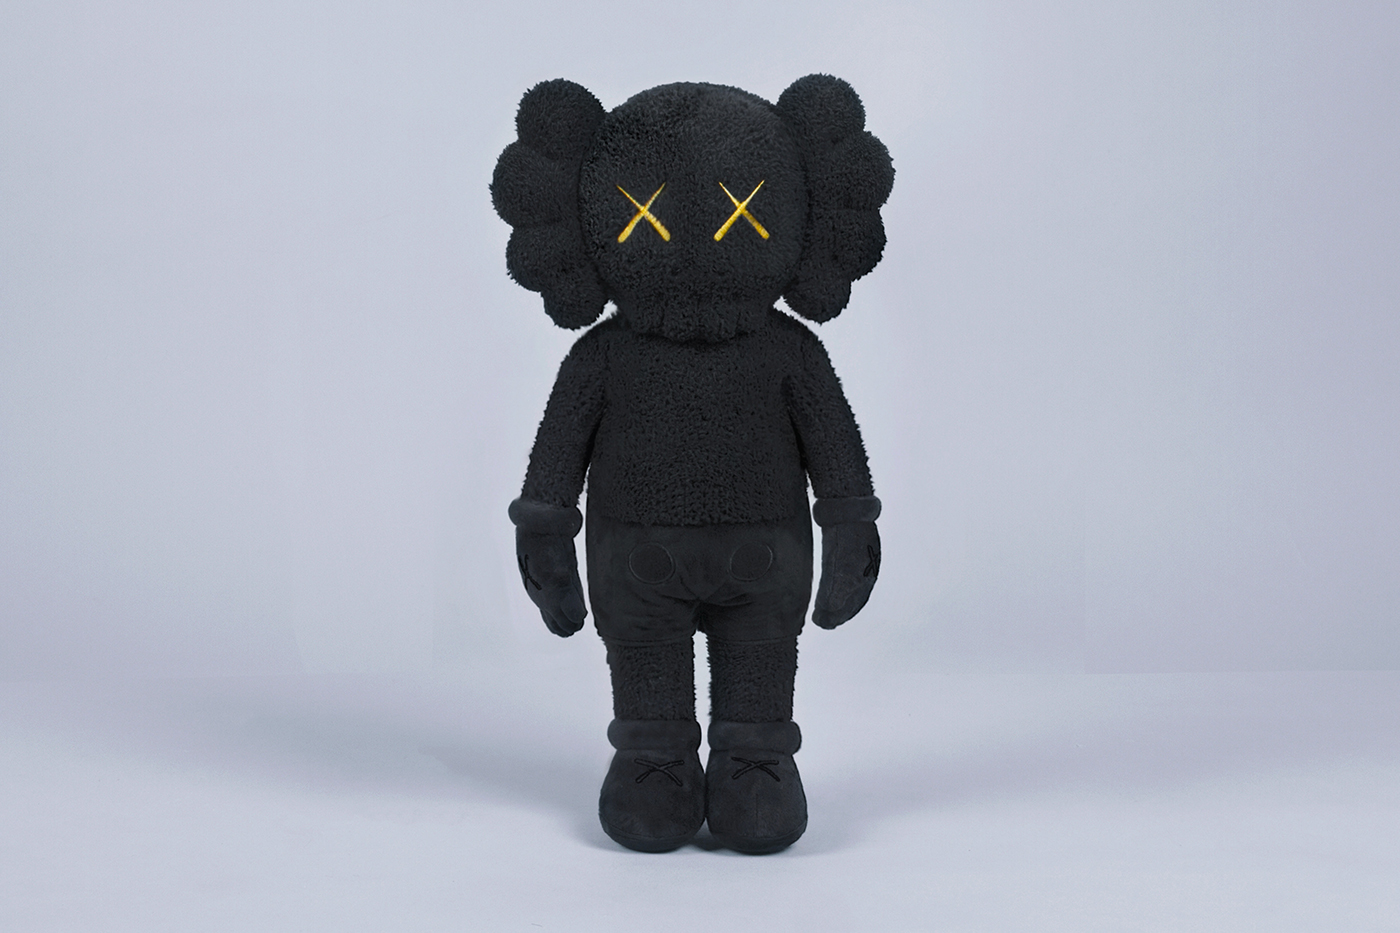 HYPEBEAST on X: Check out KAWS' latest release featuring the “KAWS  ACCOMPLICE” Plush & Lantern collectibles 🔥  / X